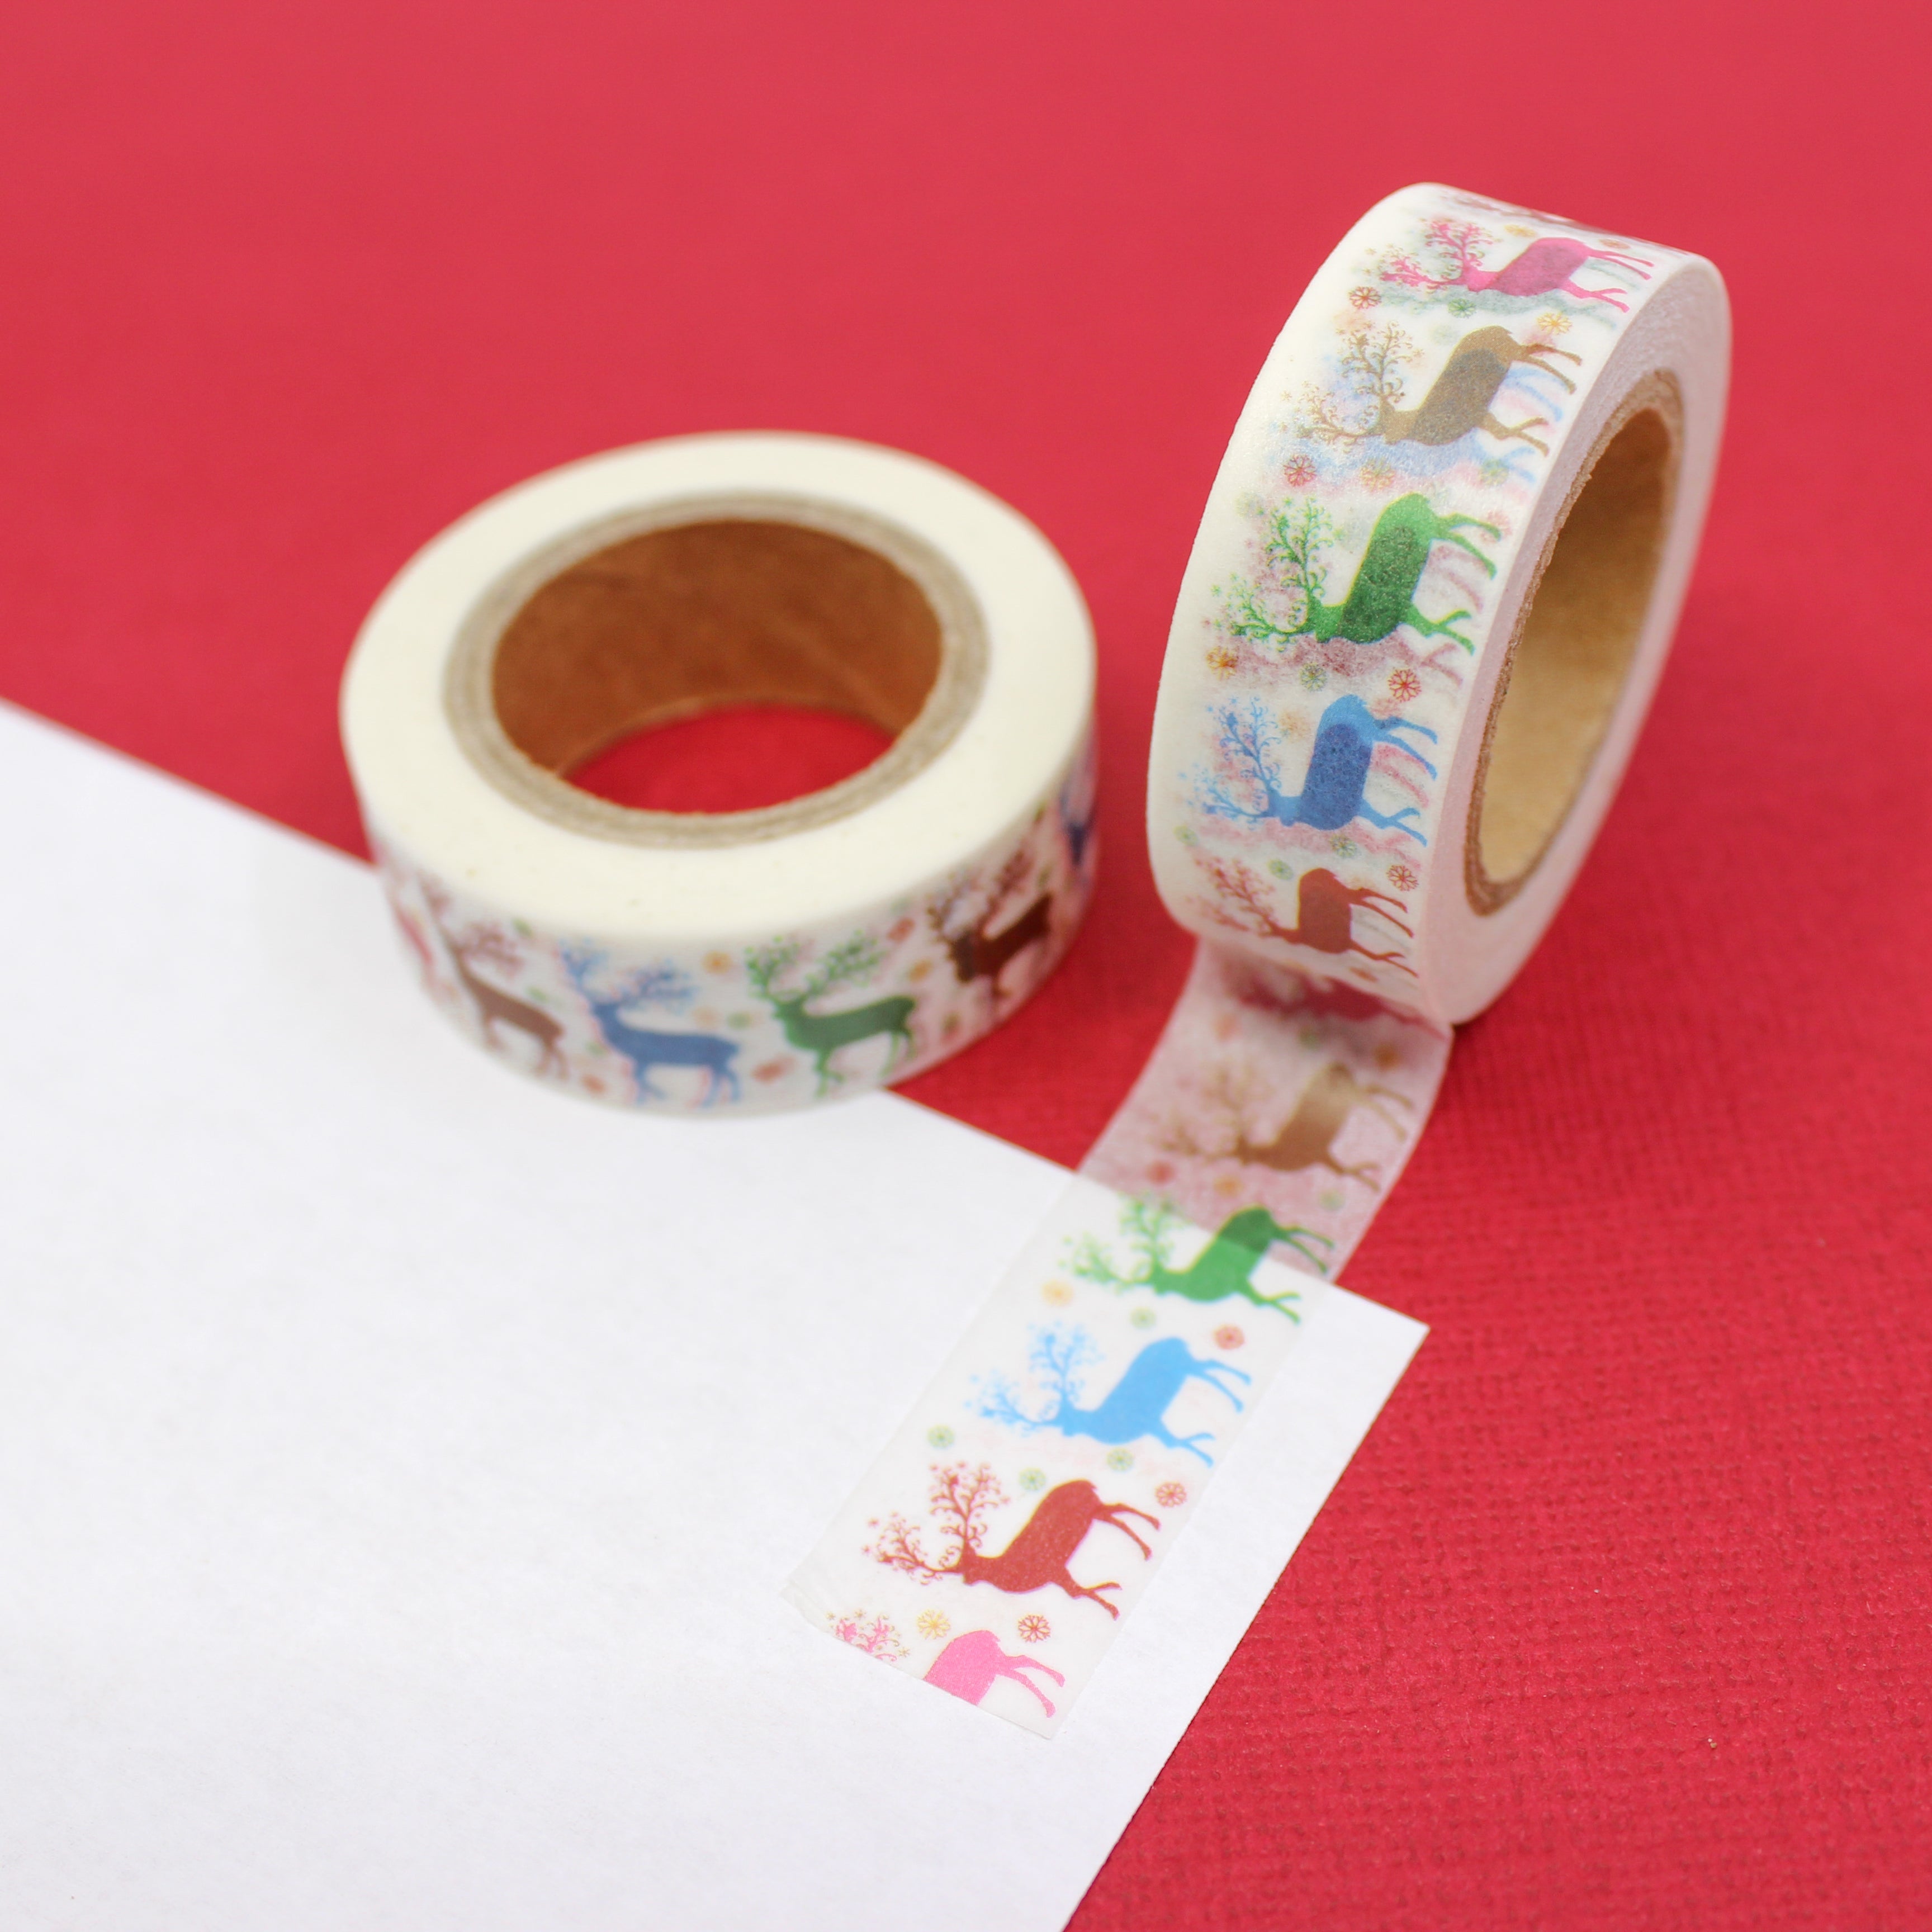 This is a colorful standing-up reindeer with snowflakes pattern Washi Tape from BBB Supplies Craft Shop